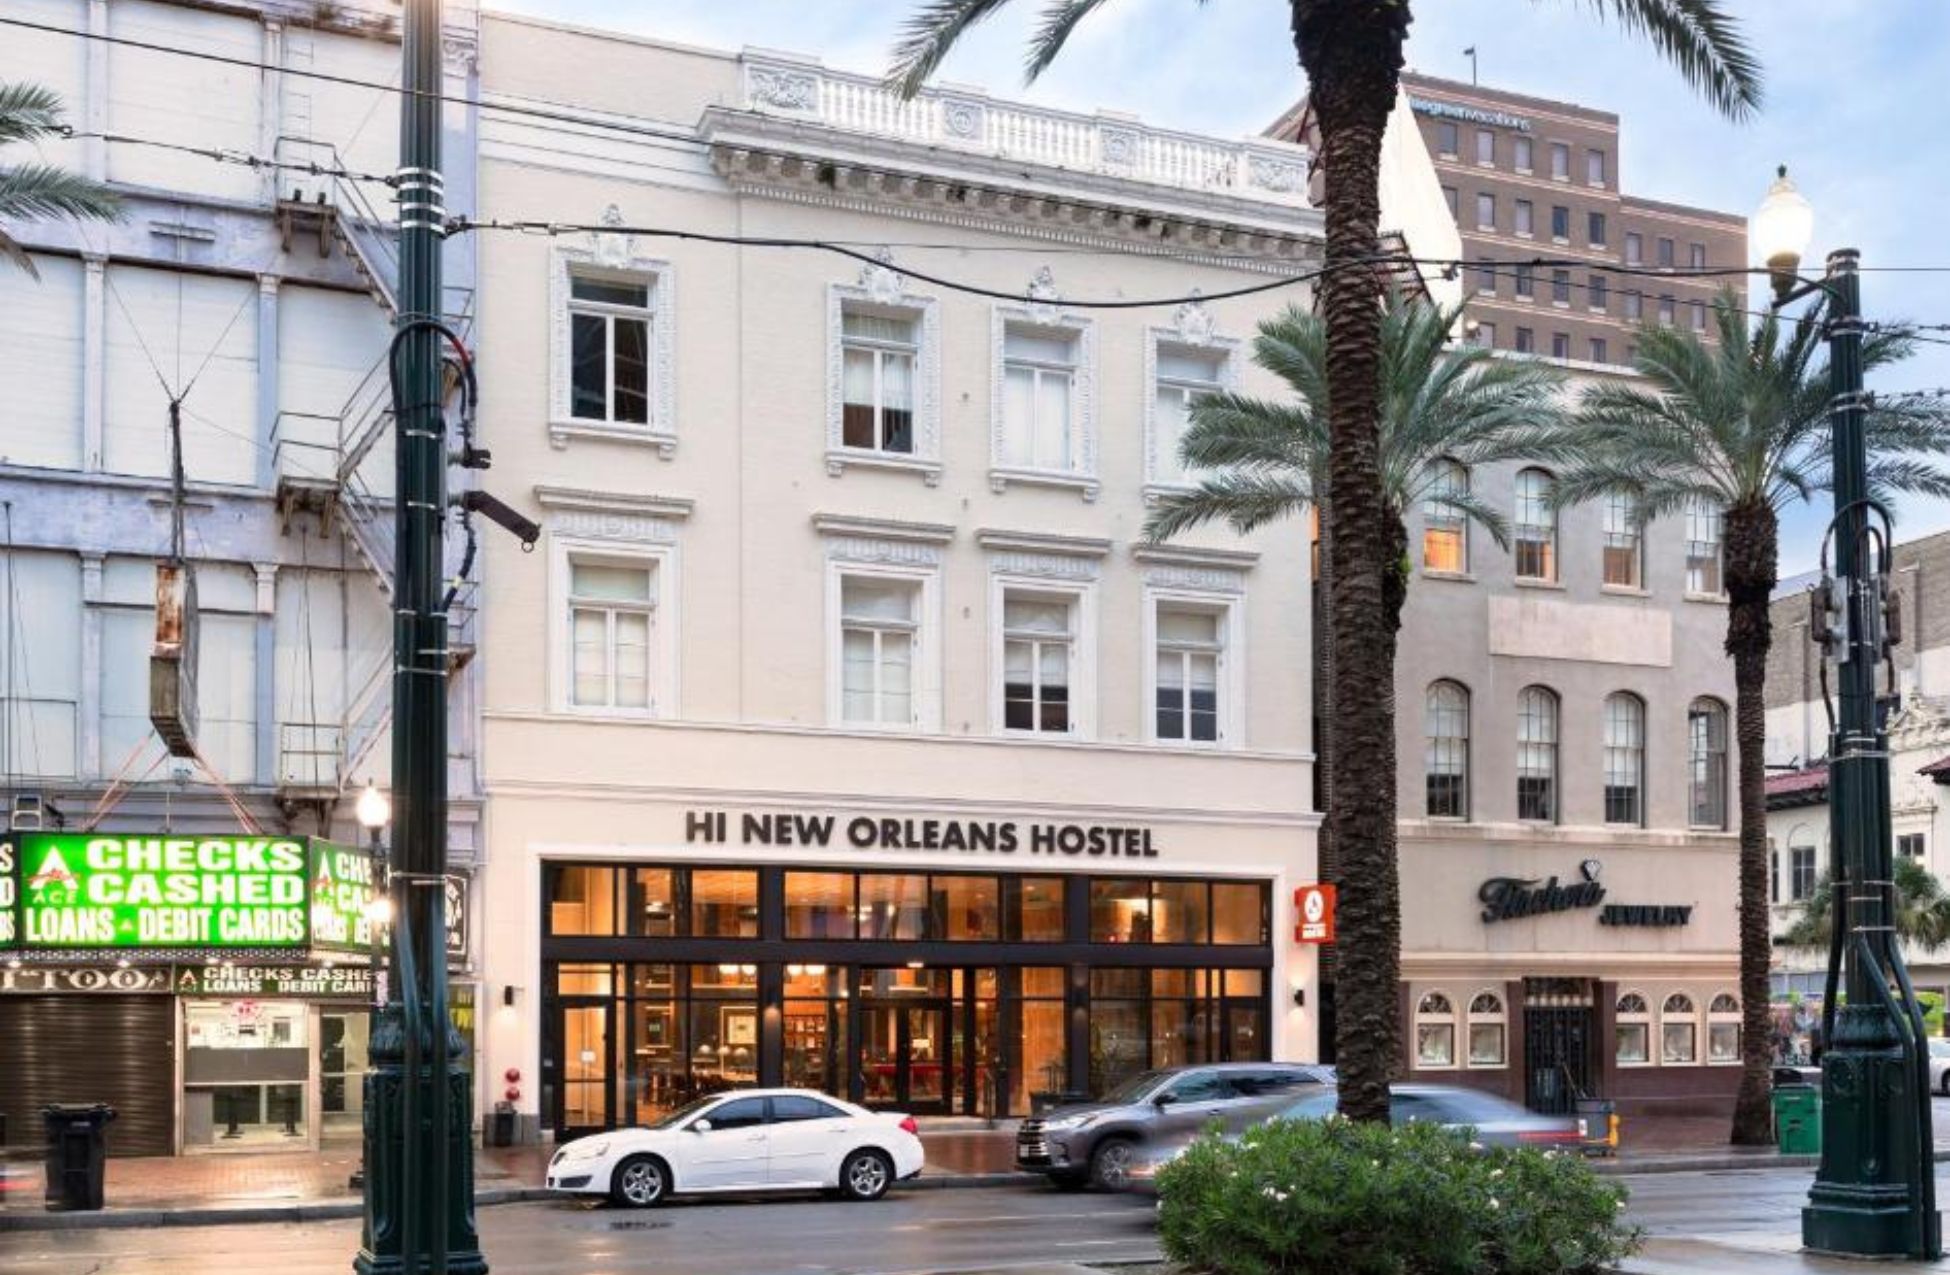 HI New Orleans Hostel - Best Hotels In New Orleans